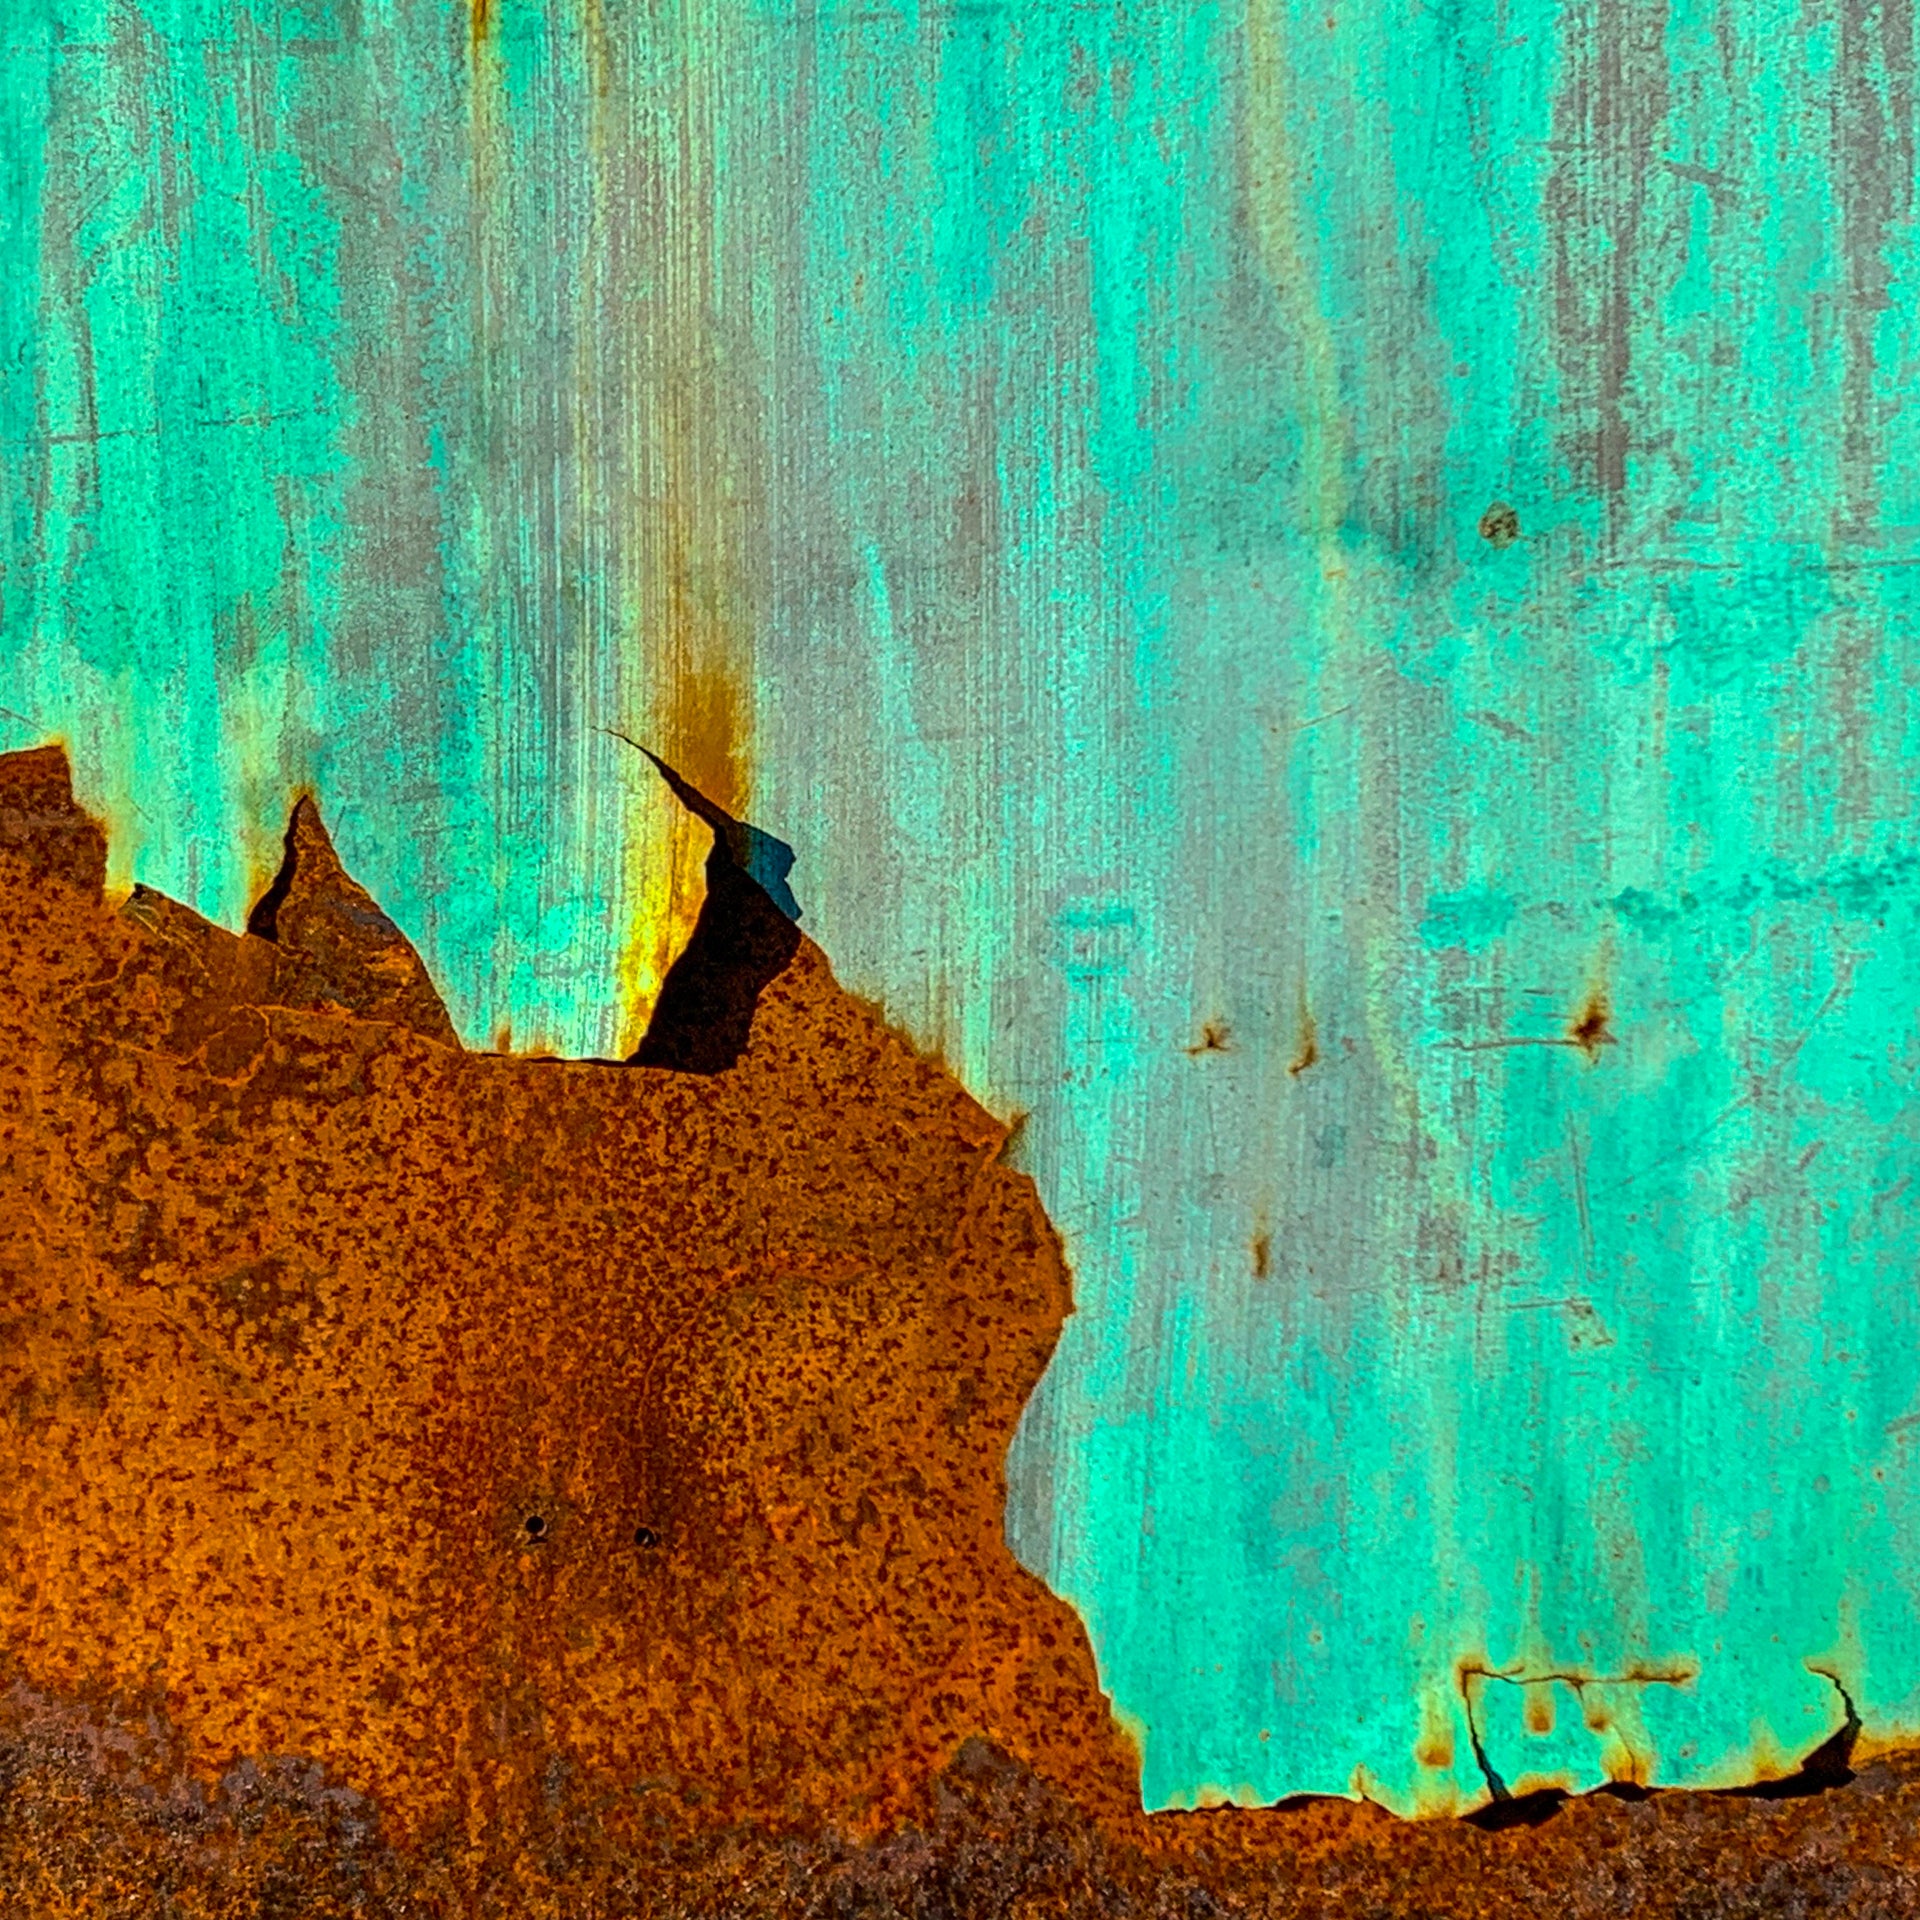 Mapping the Coastline of Copper and Verdigris